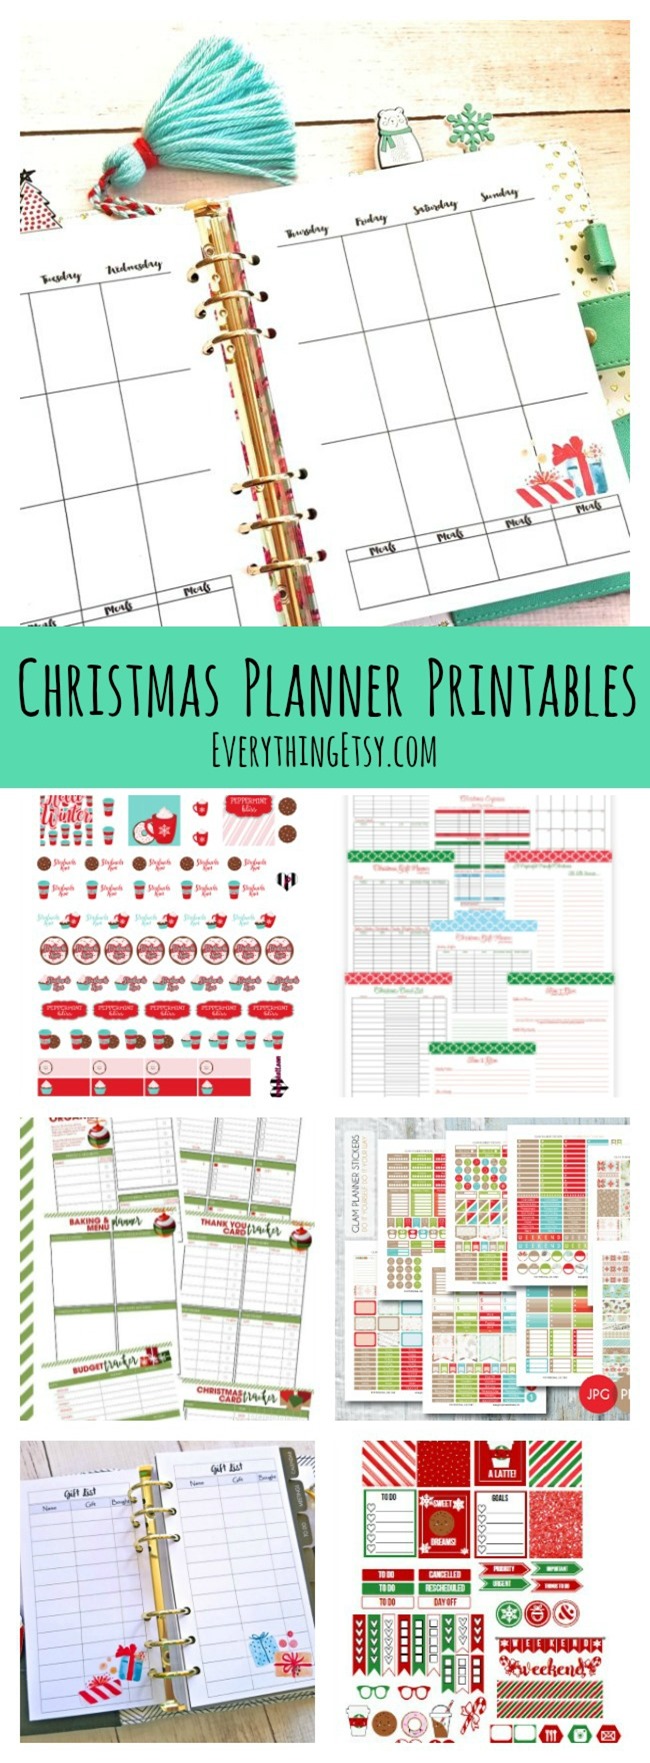 Christmas Planner Printables - Free Holiday Planners and Planner Stickers - EverythingEtsy.com